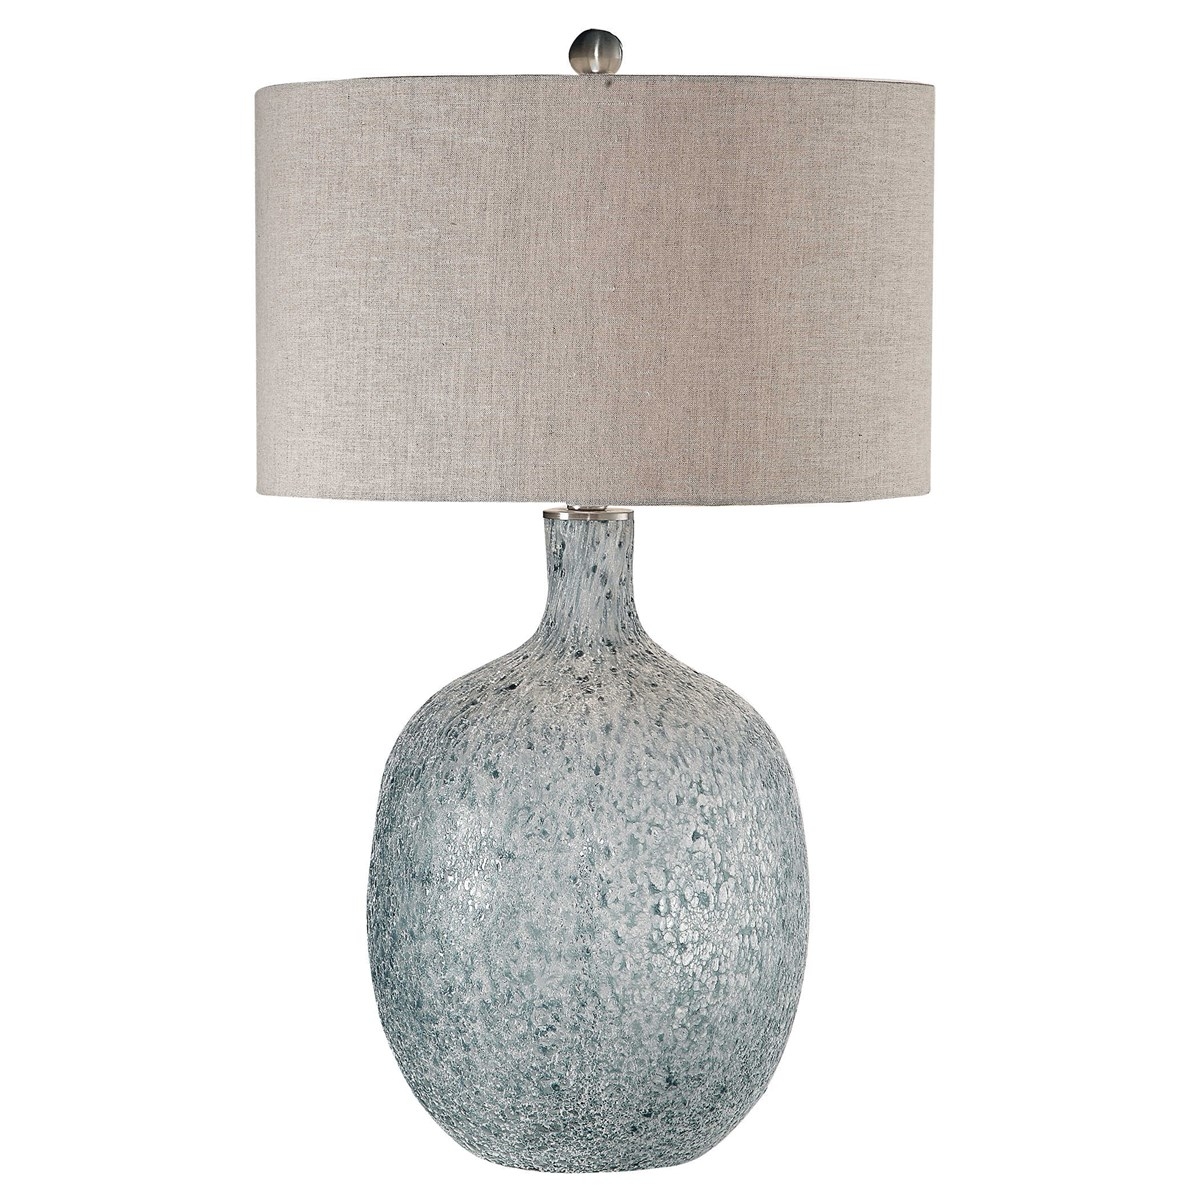 OCEAONNA TABLE LAMP - Image 0